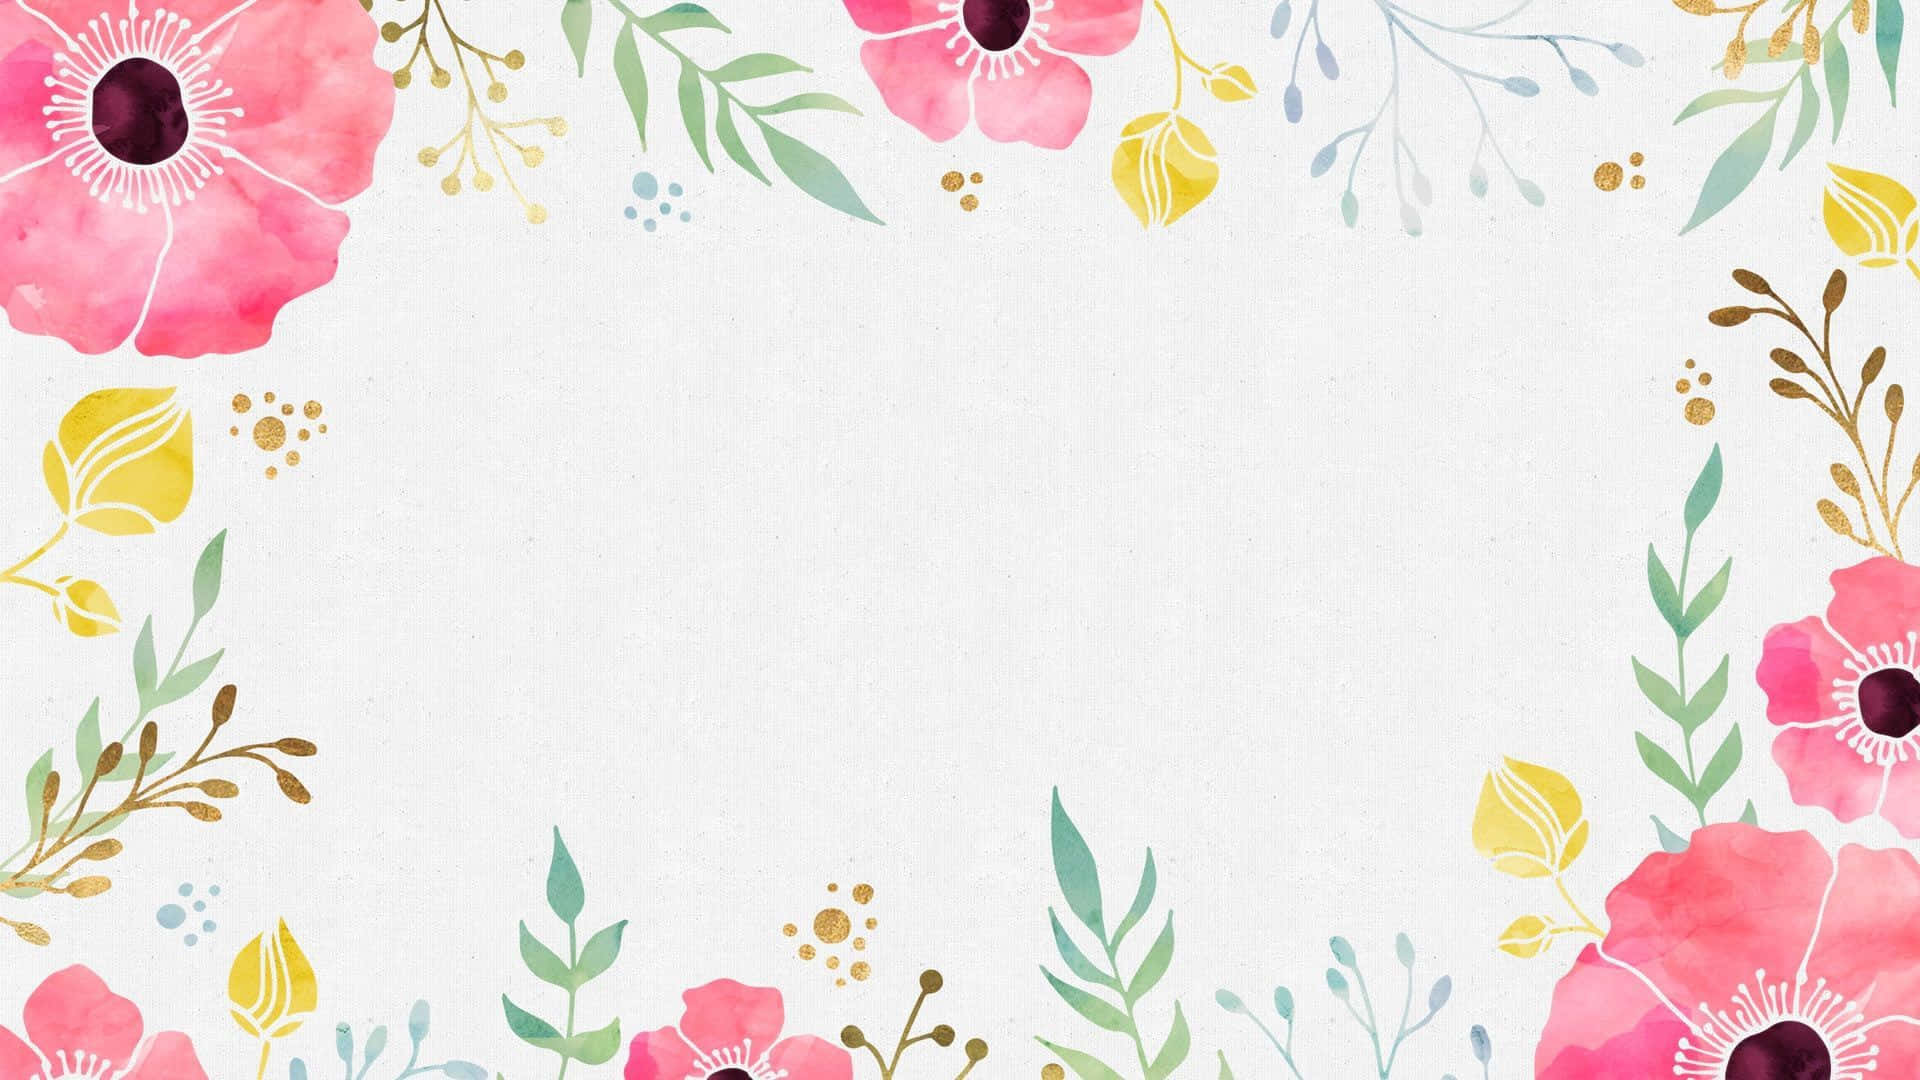 A Detailed Watercolor Floral Background